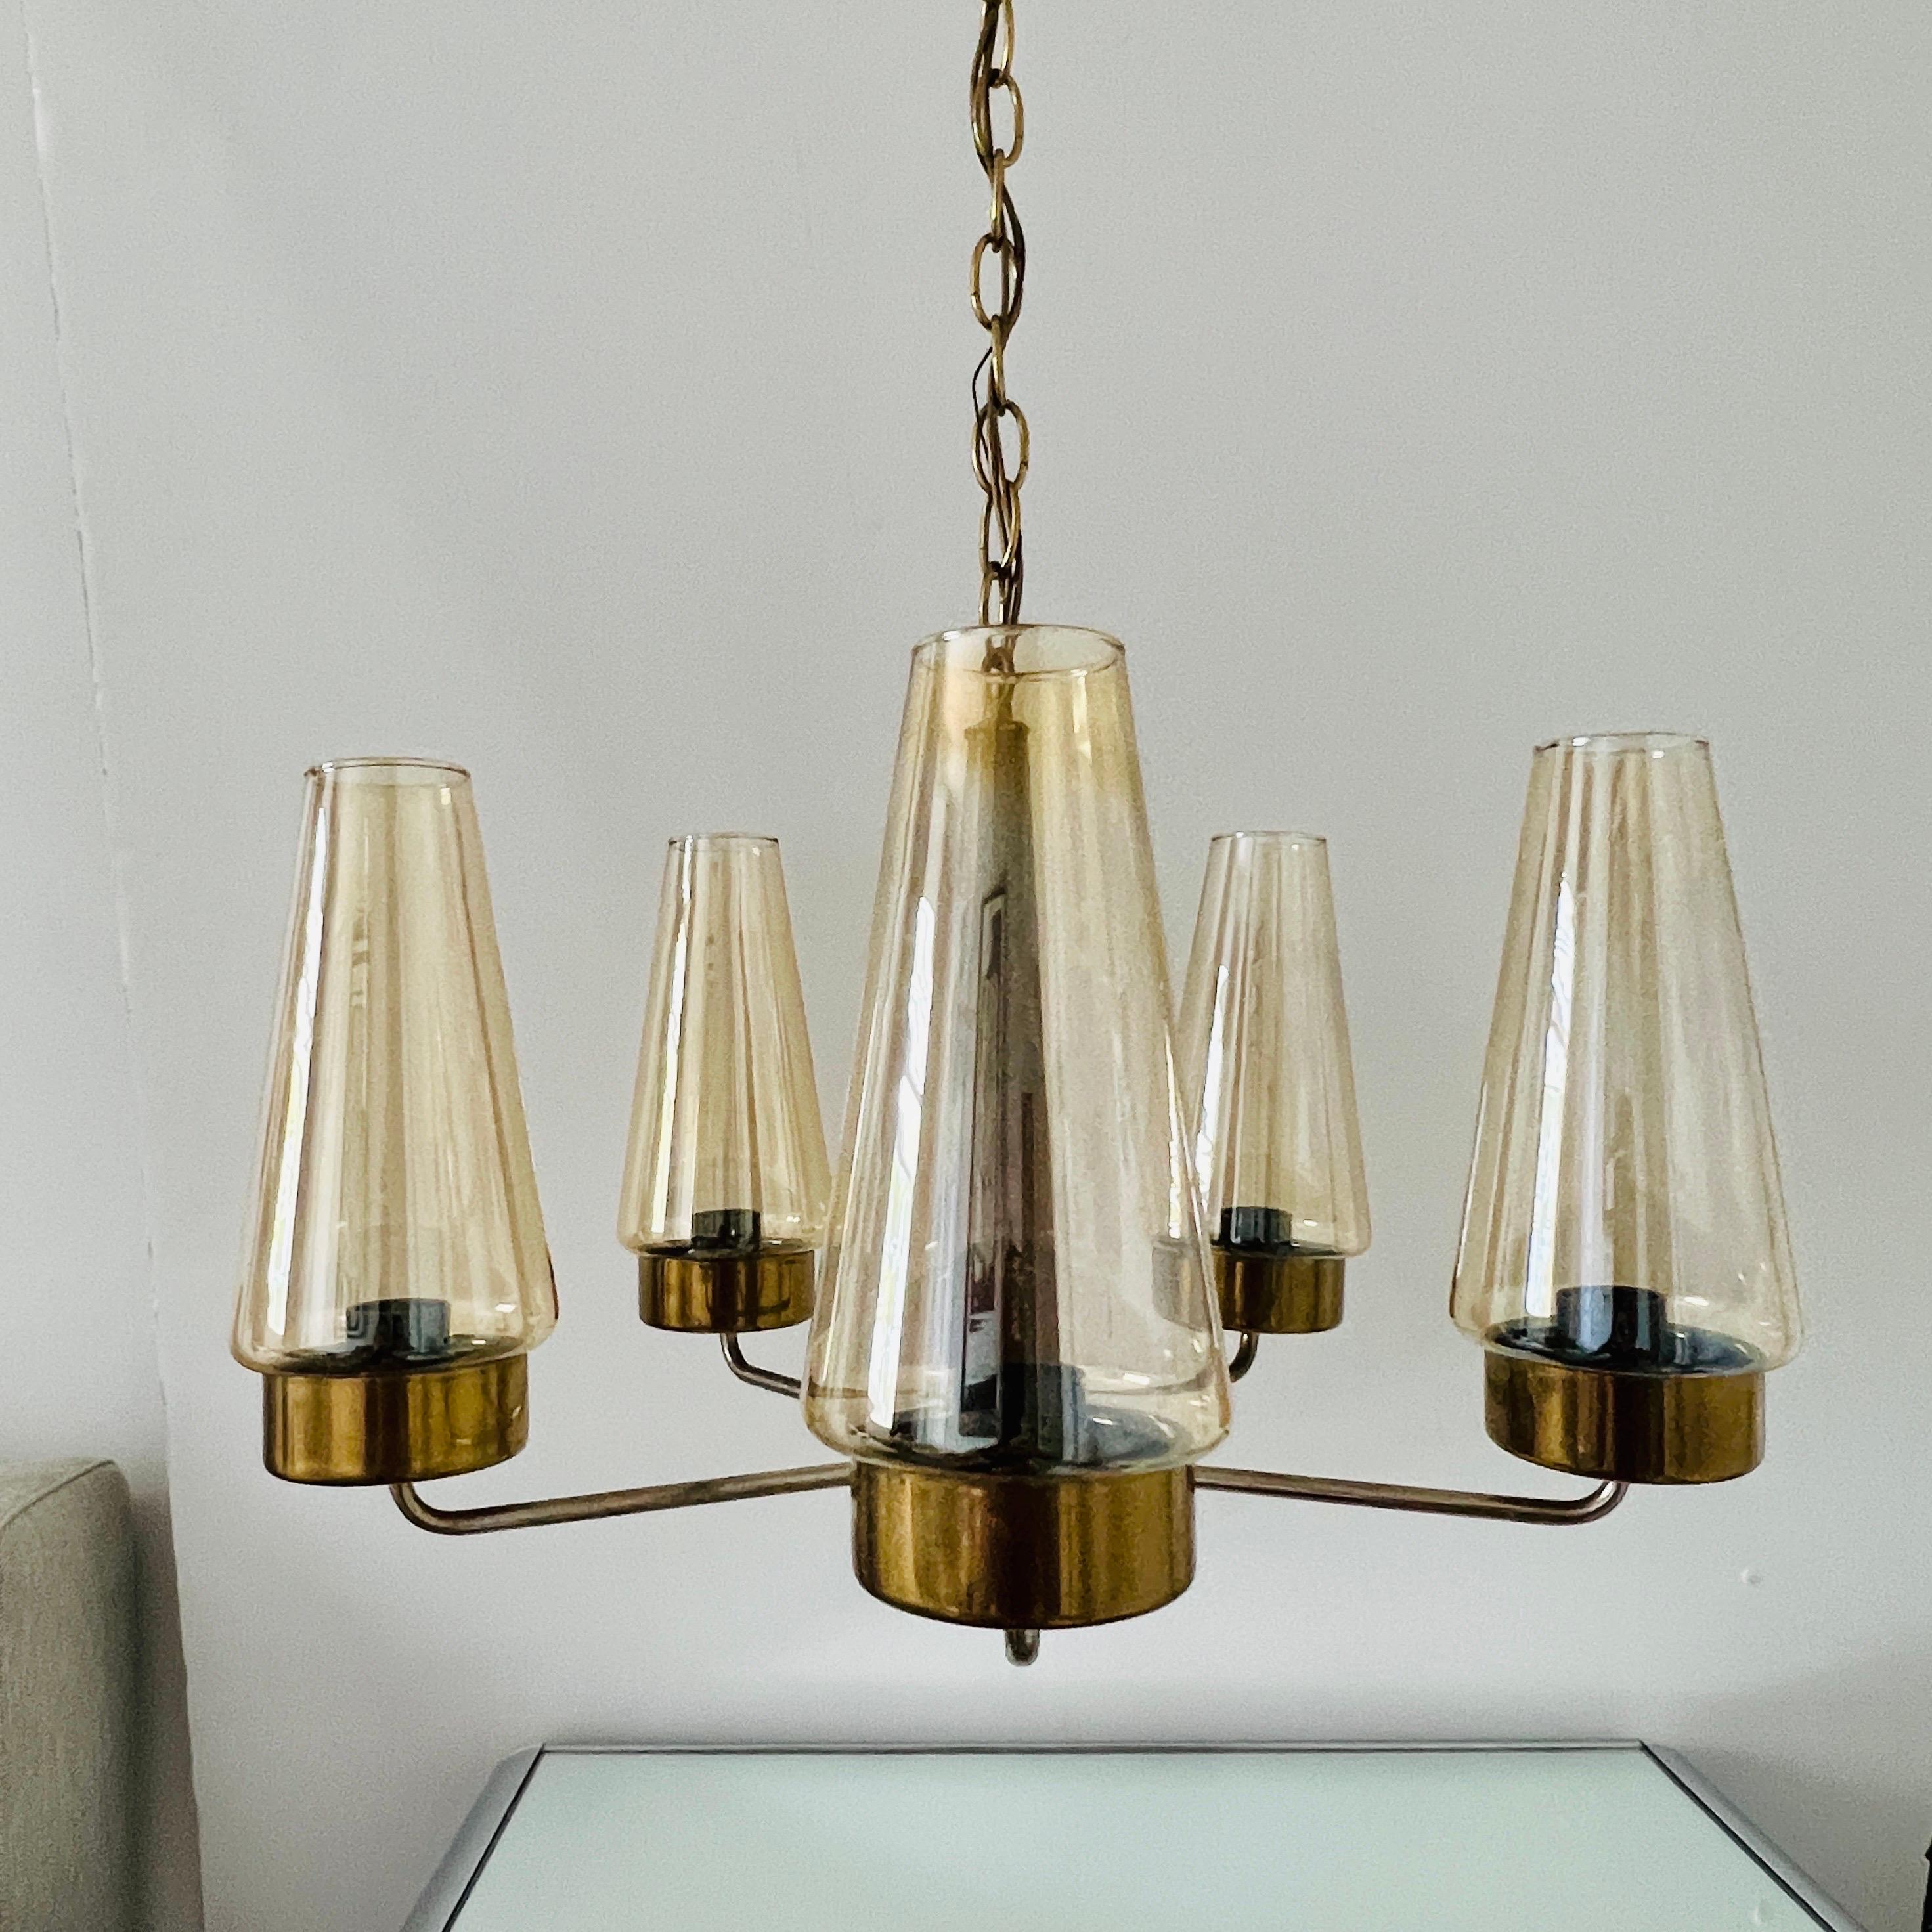 Danish Mid-Century Modern chandelier with teak wood stem, chrome and brass metal, and fitted with five lights.  The chandelier features blown glass hurricane shades in iridescent bronze or amber hues. Adjustable chain allows for desired height.